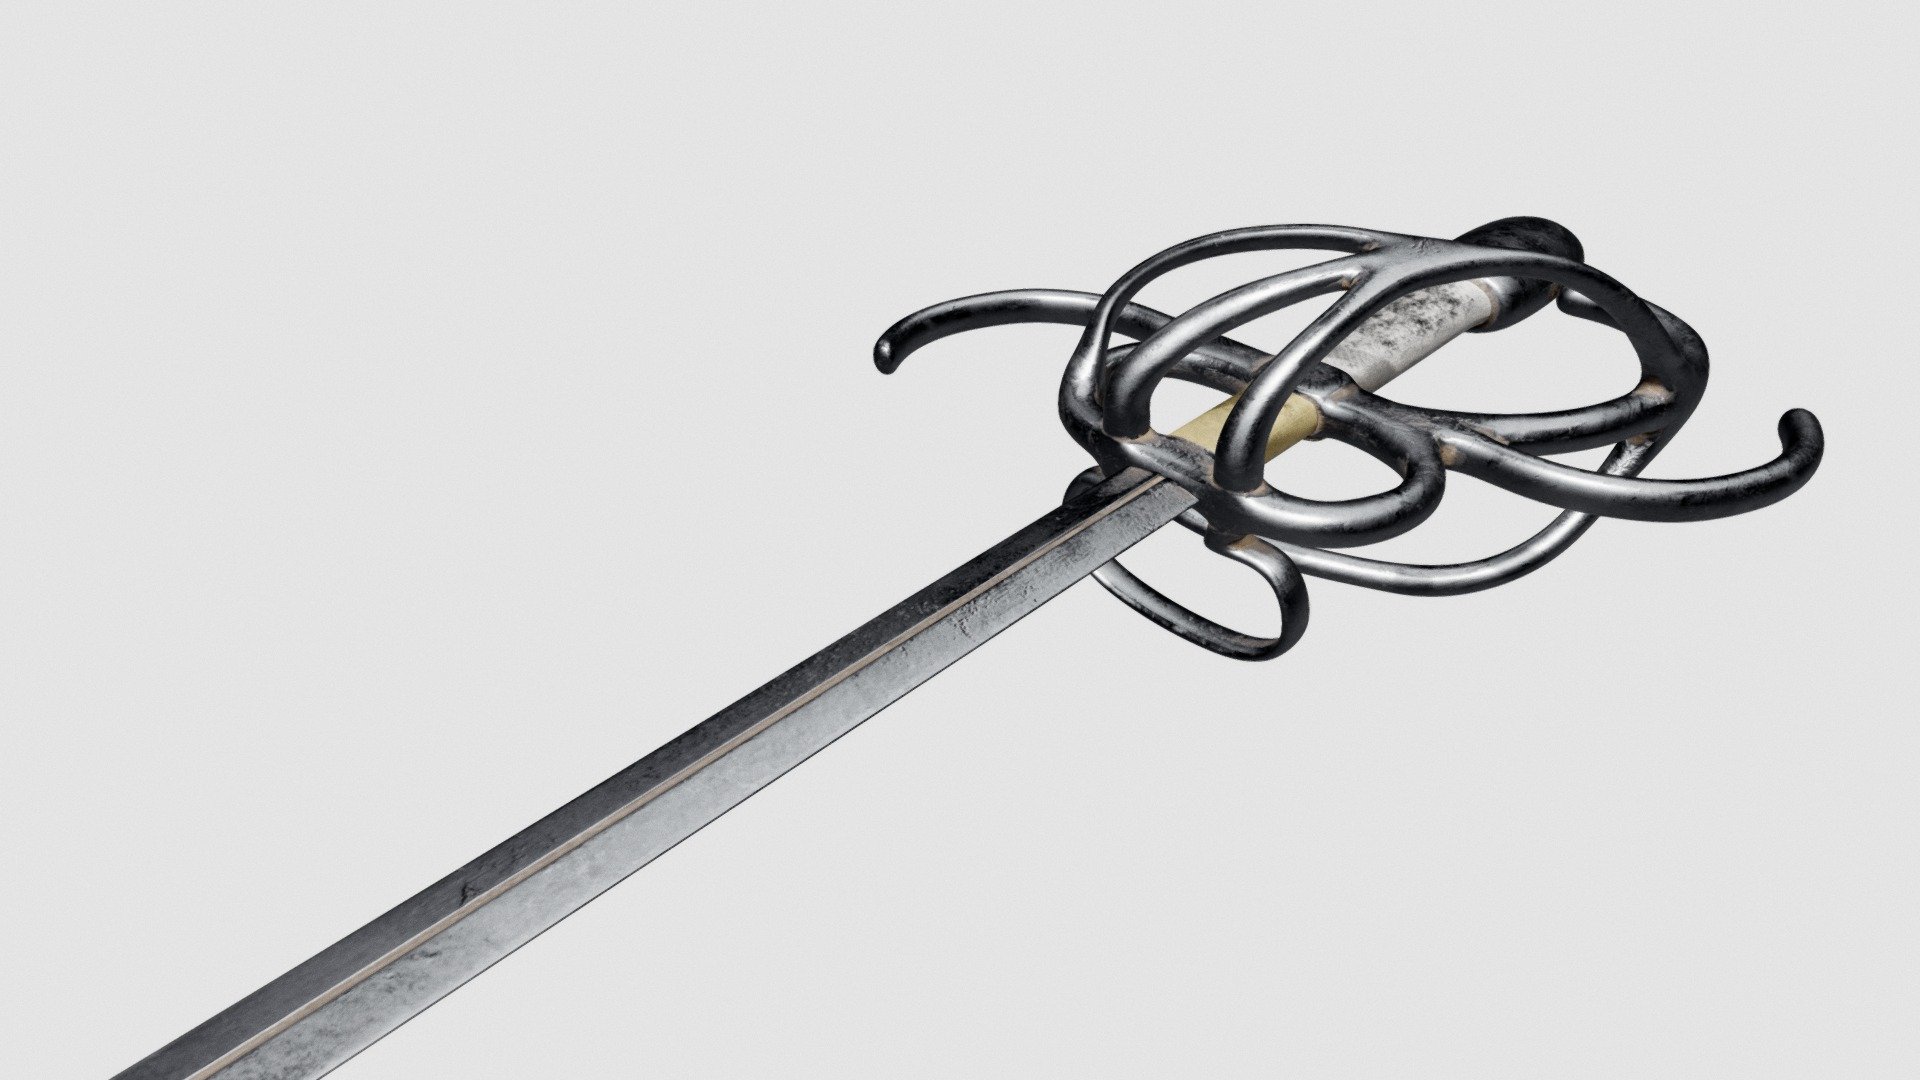 The sword of D. João de Mascarenhas can be characterized as a rapier, a type of sword that evolved from the Spanish ropera in the late XVI century. Rather than a military sword the rapier was used in a more civil fashion. It was an ornamental item used by the nobility of the XVII and XVIII centuries and if it ever had to be used in combat it would be mainly in duels. However, since duelers could not wear armor or bear shields, the use of the rapier lead to the development of defense techniques solely based on body movement and blocking with the sword itself.
 Usually the rapier was a very light and very balanced sword, with its guard in the shape of a cup. This, however, is not the case with the sword of D. João, since the guard has only a circular body section followed by three cross-guards in a similar fashion 3d model